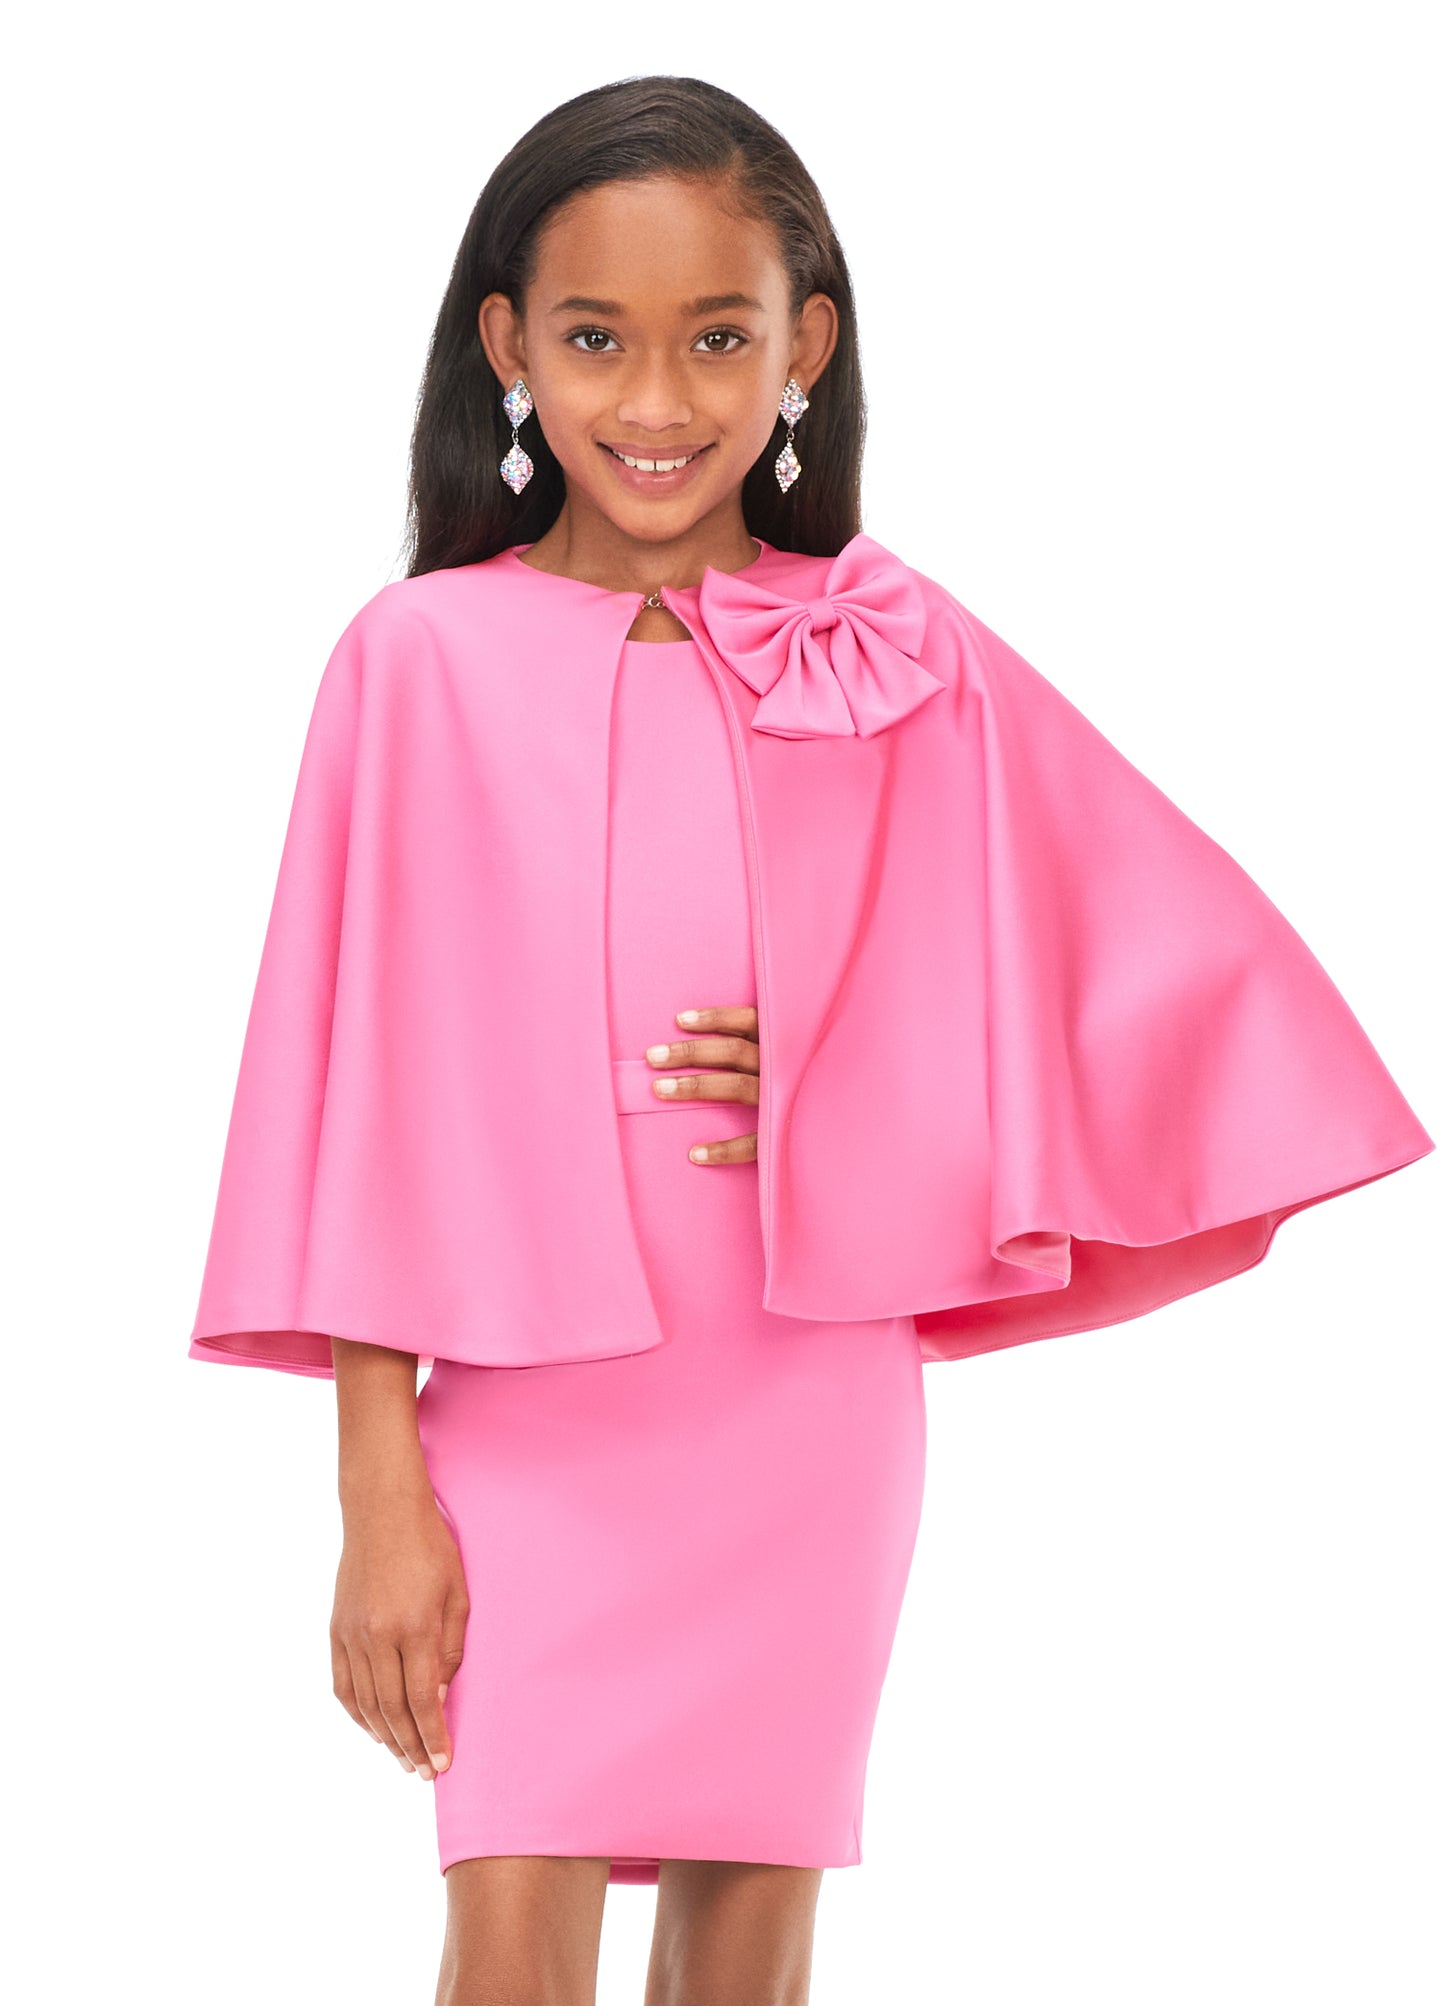 Ashley Lauren Kids 8166 Girls Cocktail Dress with Cape Bow  Two looks in one! This dress features a detachable, bow-adorned cape. Underneath the cape is a simple and stunning crepe dress perfect for your next event.